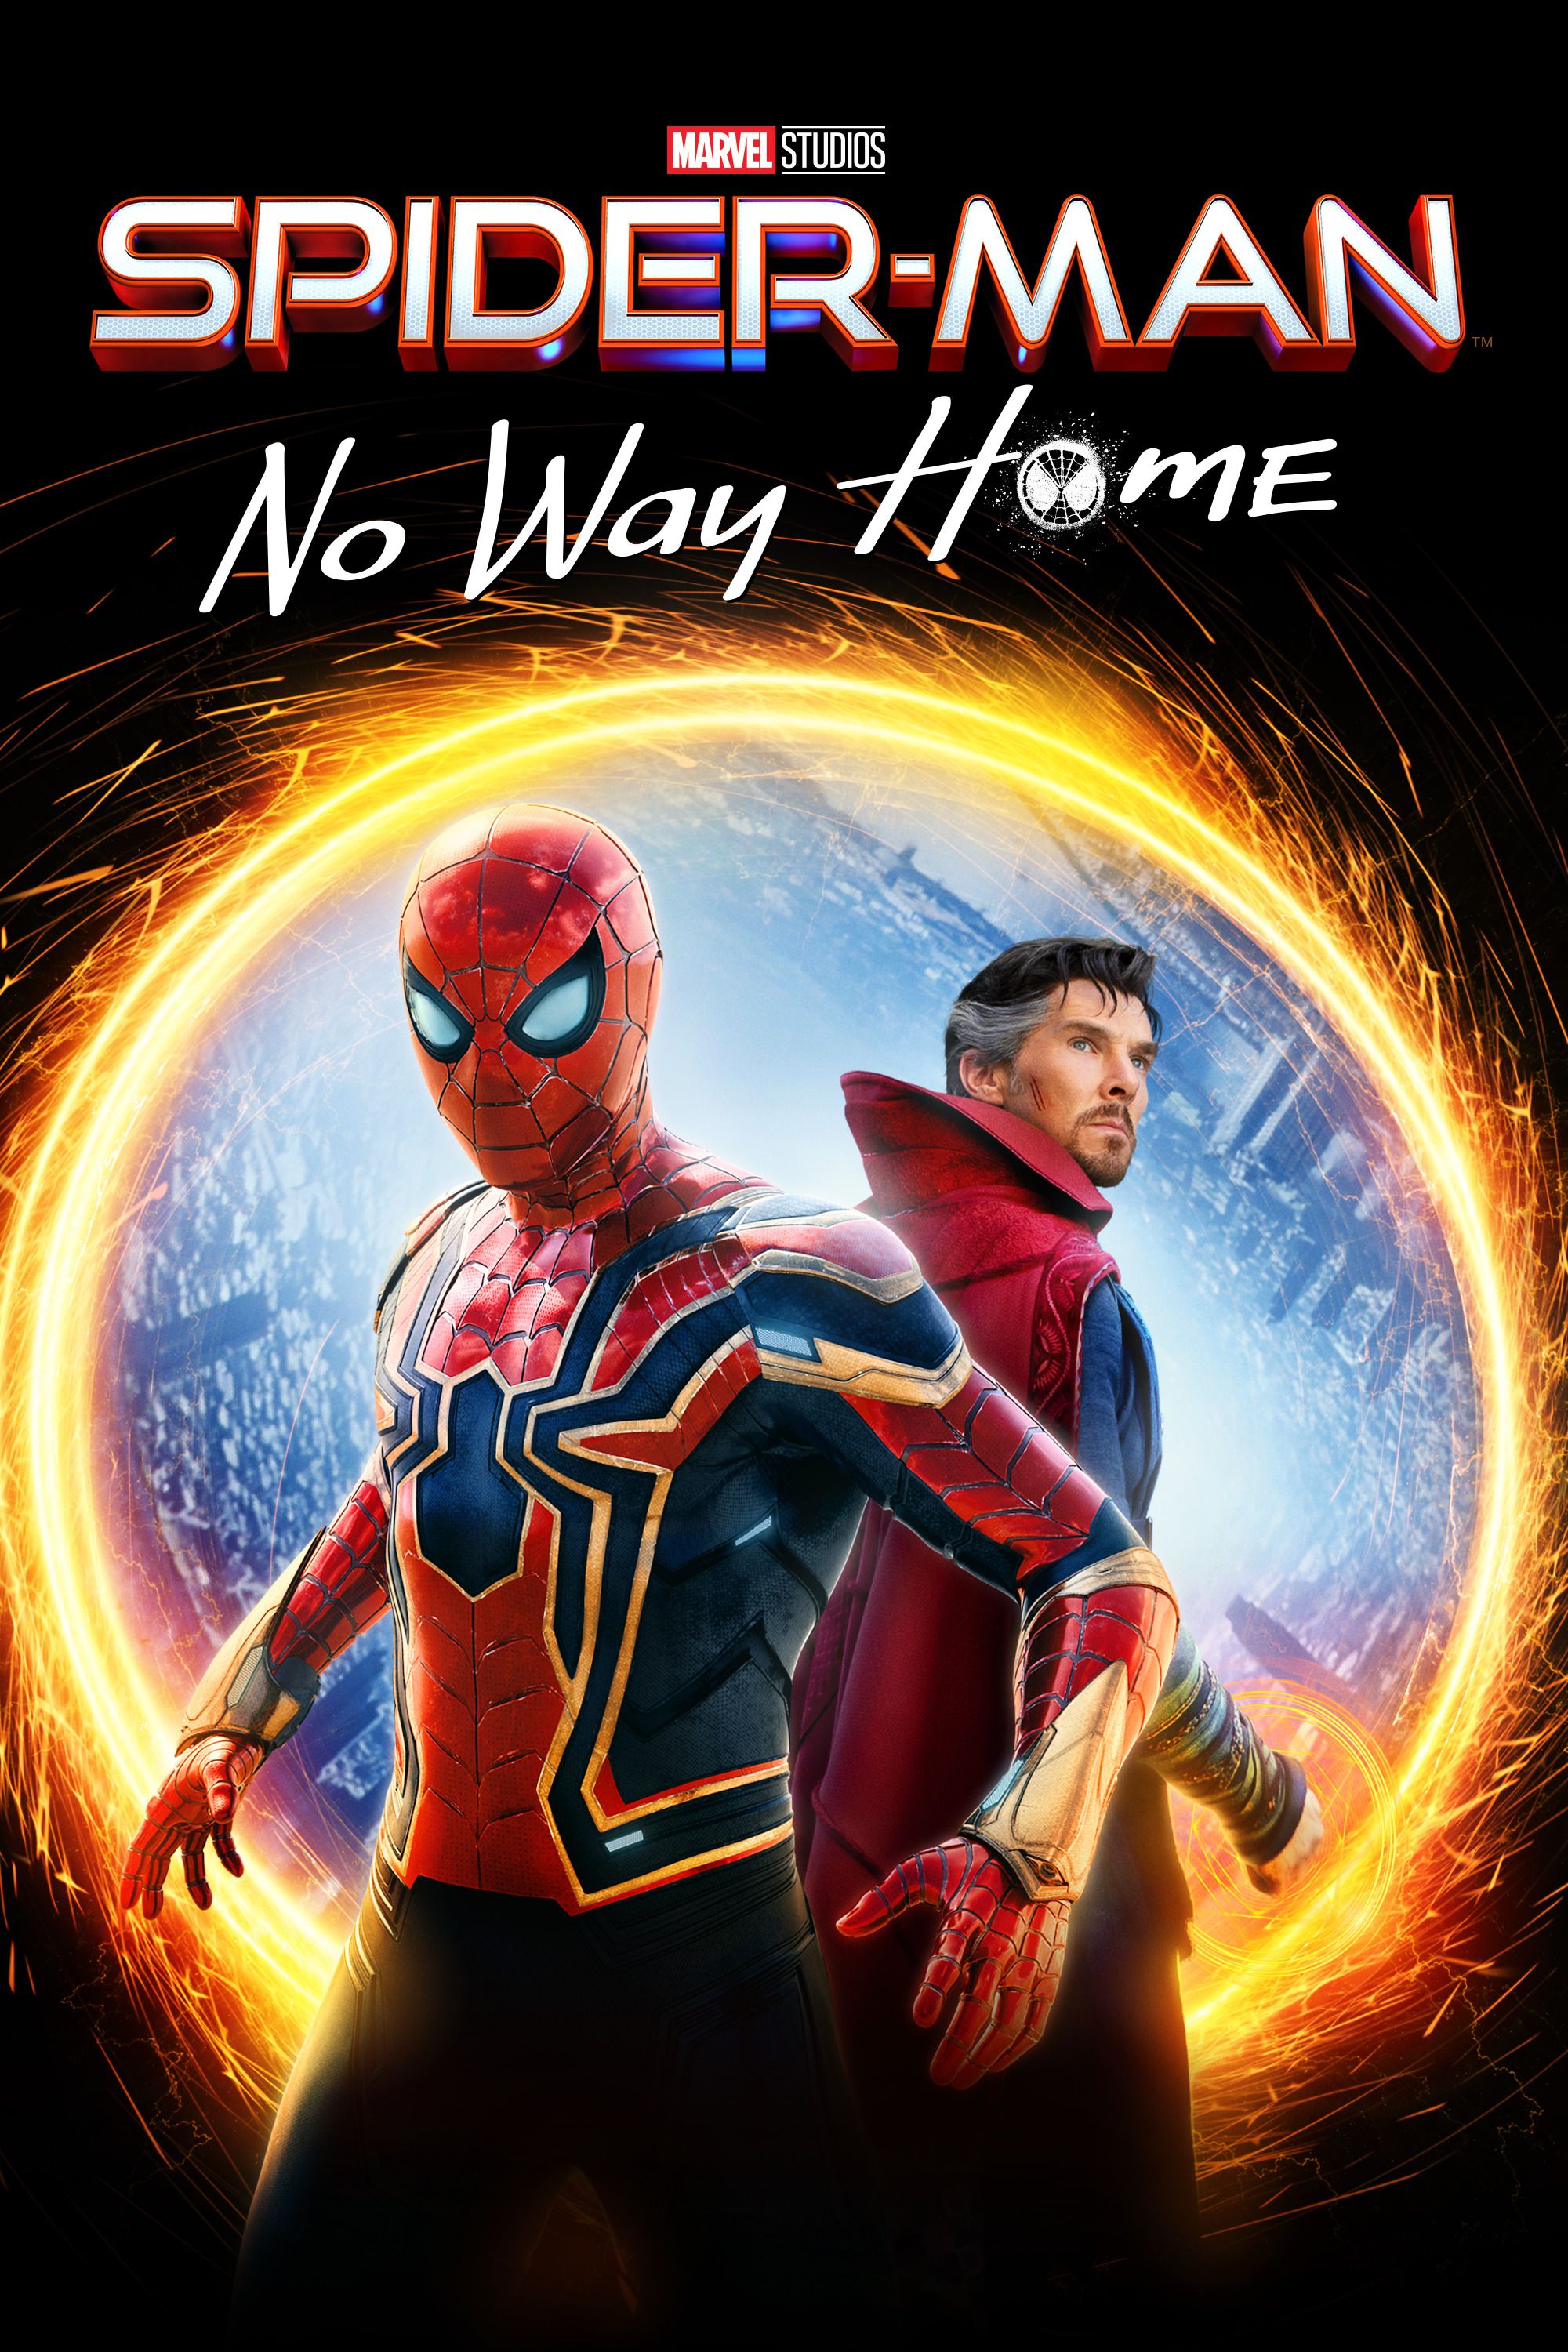 Spiderman no way home hindi download 3d chess game free download for windows 7 32bit